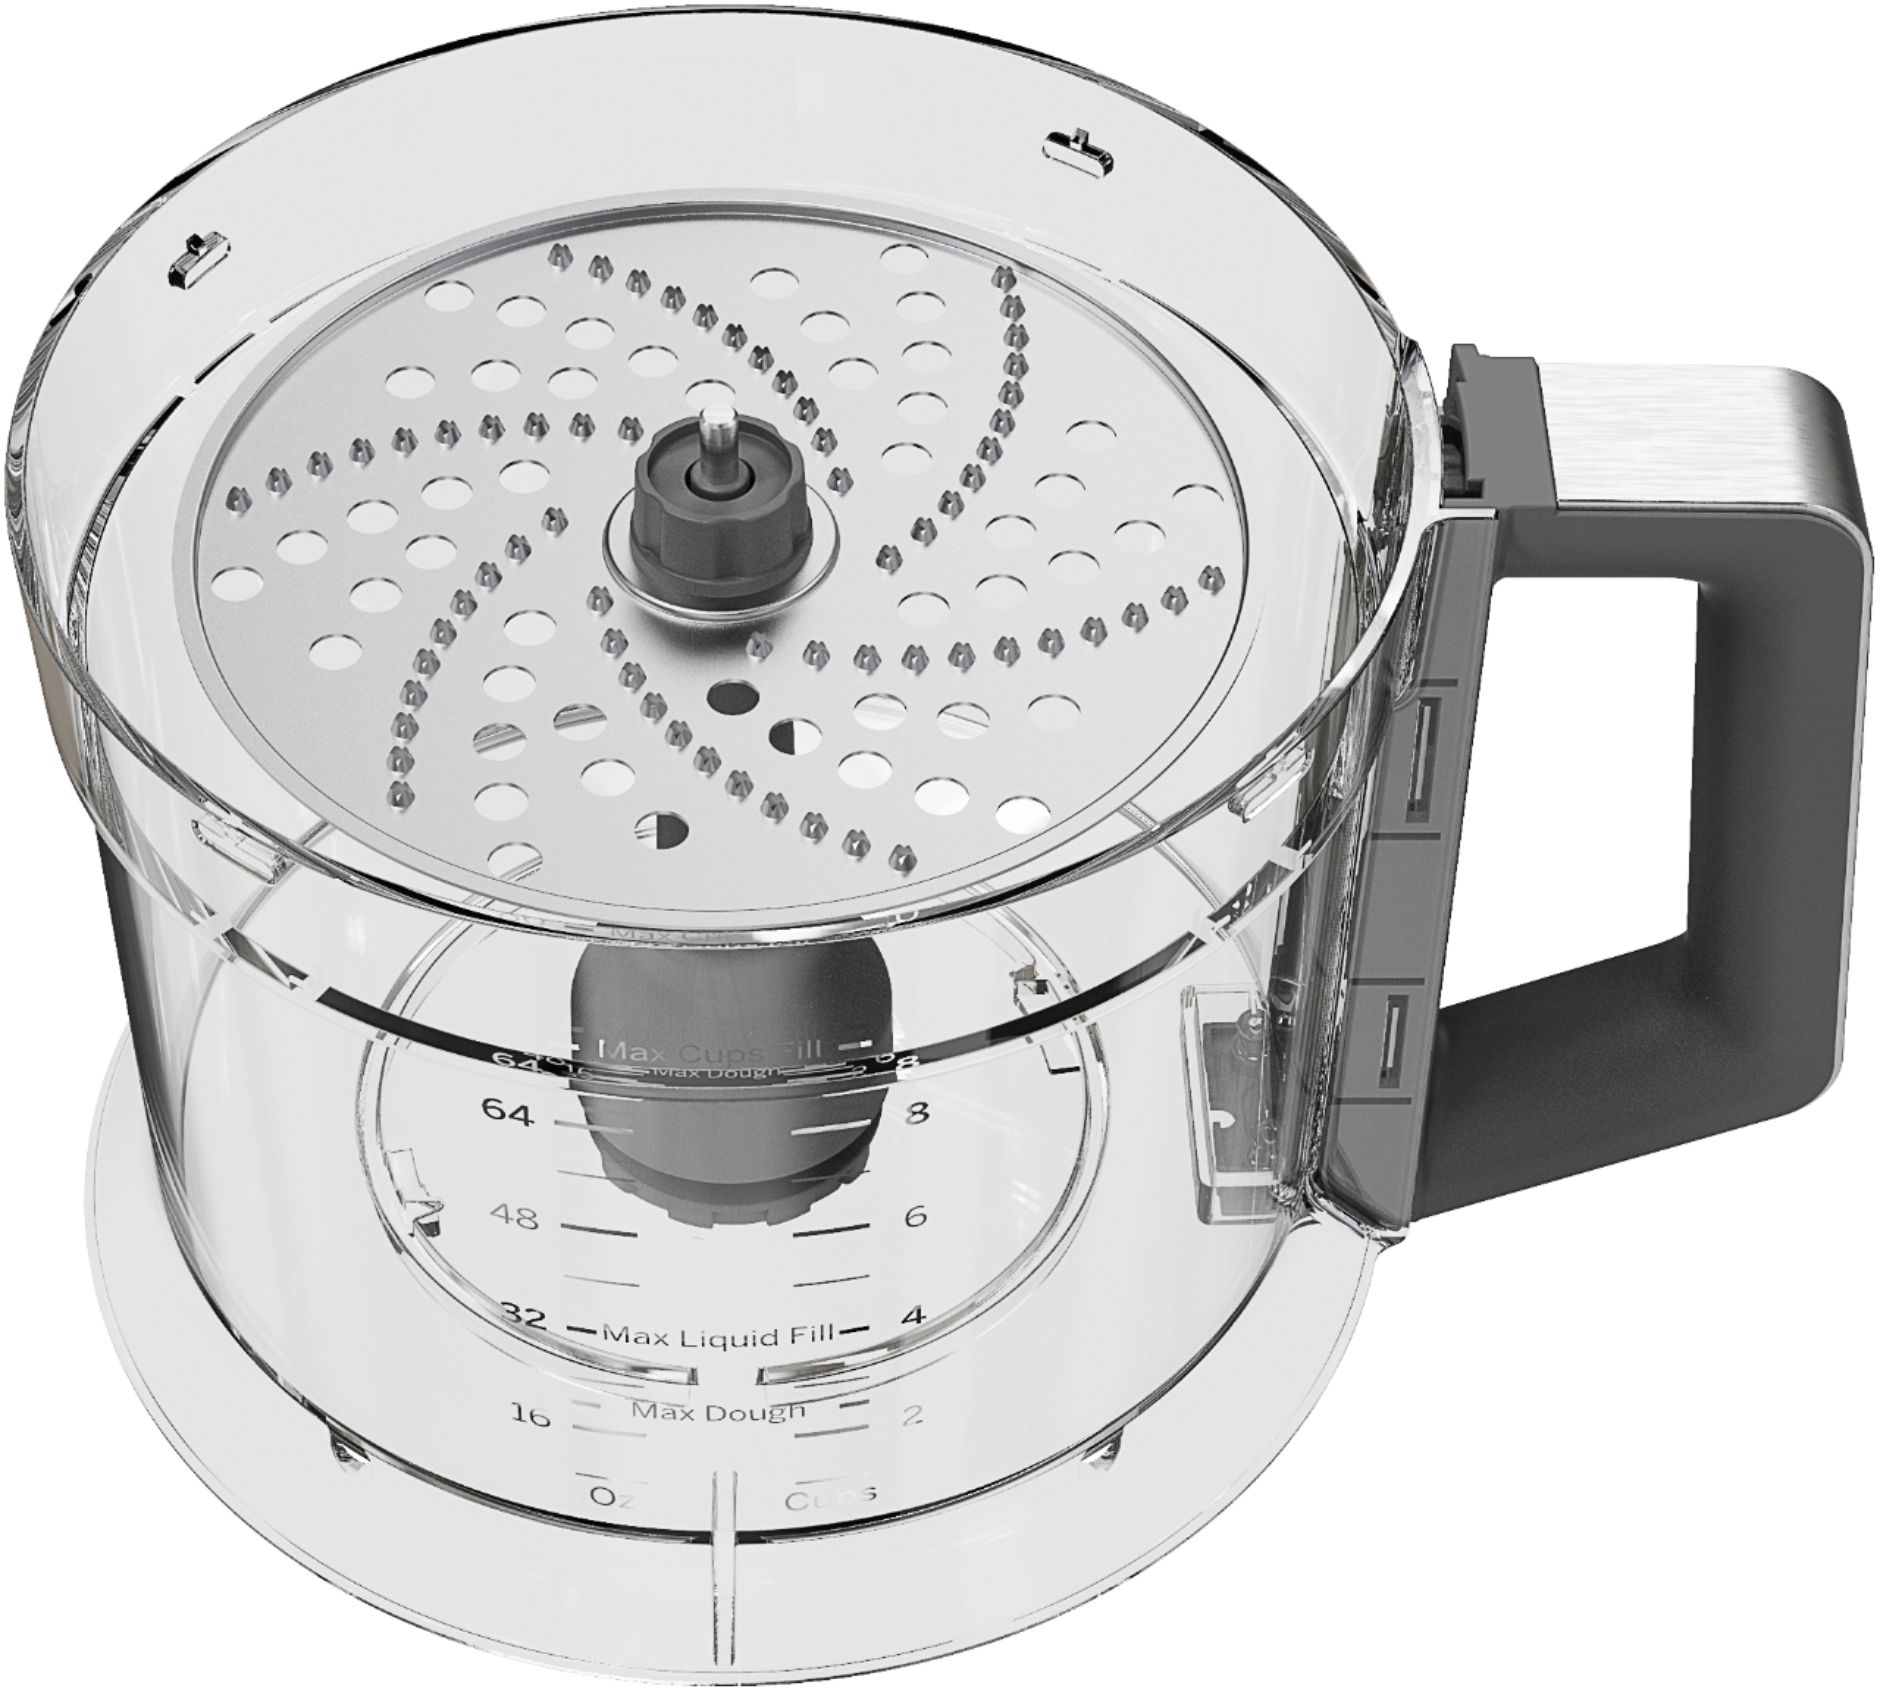  GE Food Processor, 12 Cup, Complete with 3 Feeding Tubes &  Stainless Steel Accessories-3 Discs + Dough Blade, 3 Speed, for Shredded  Cheese, Chicken & More, Kitchen Essentials